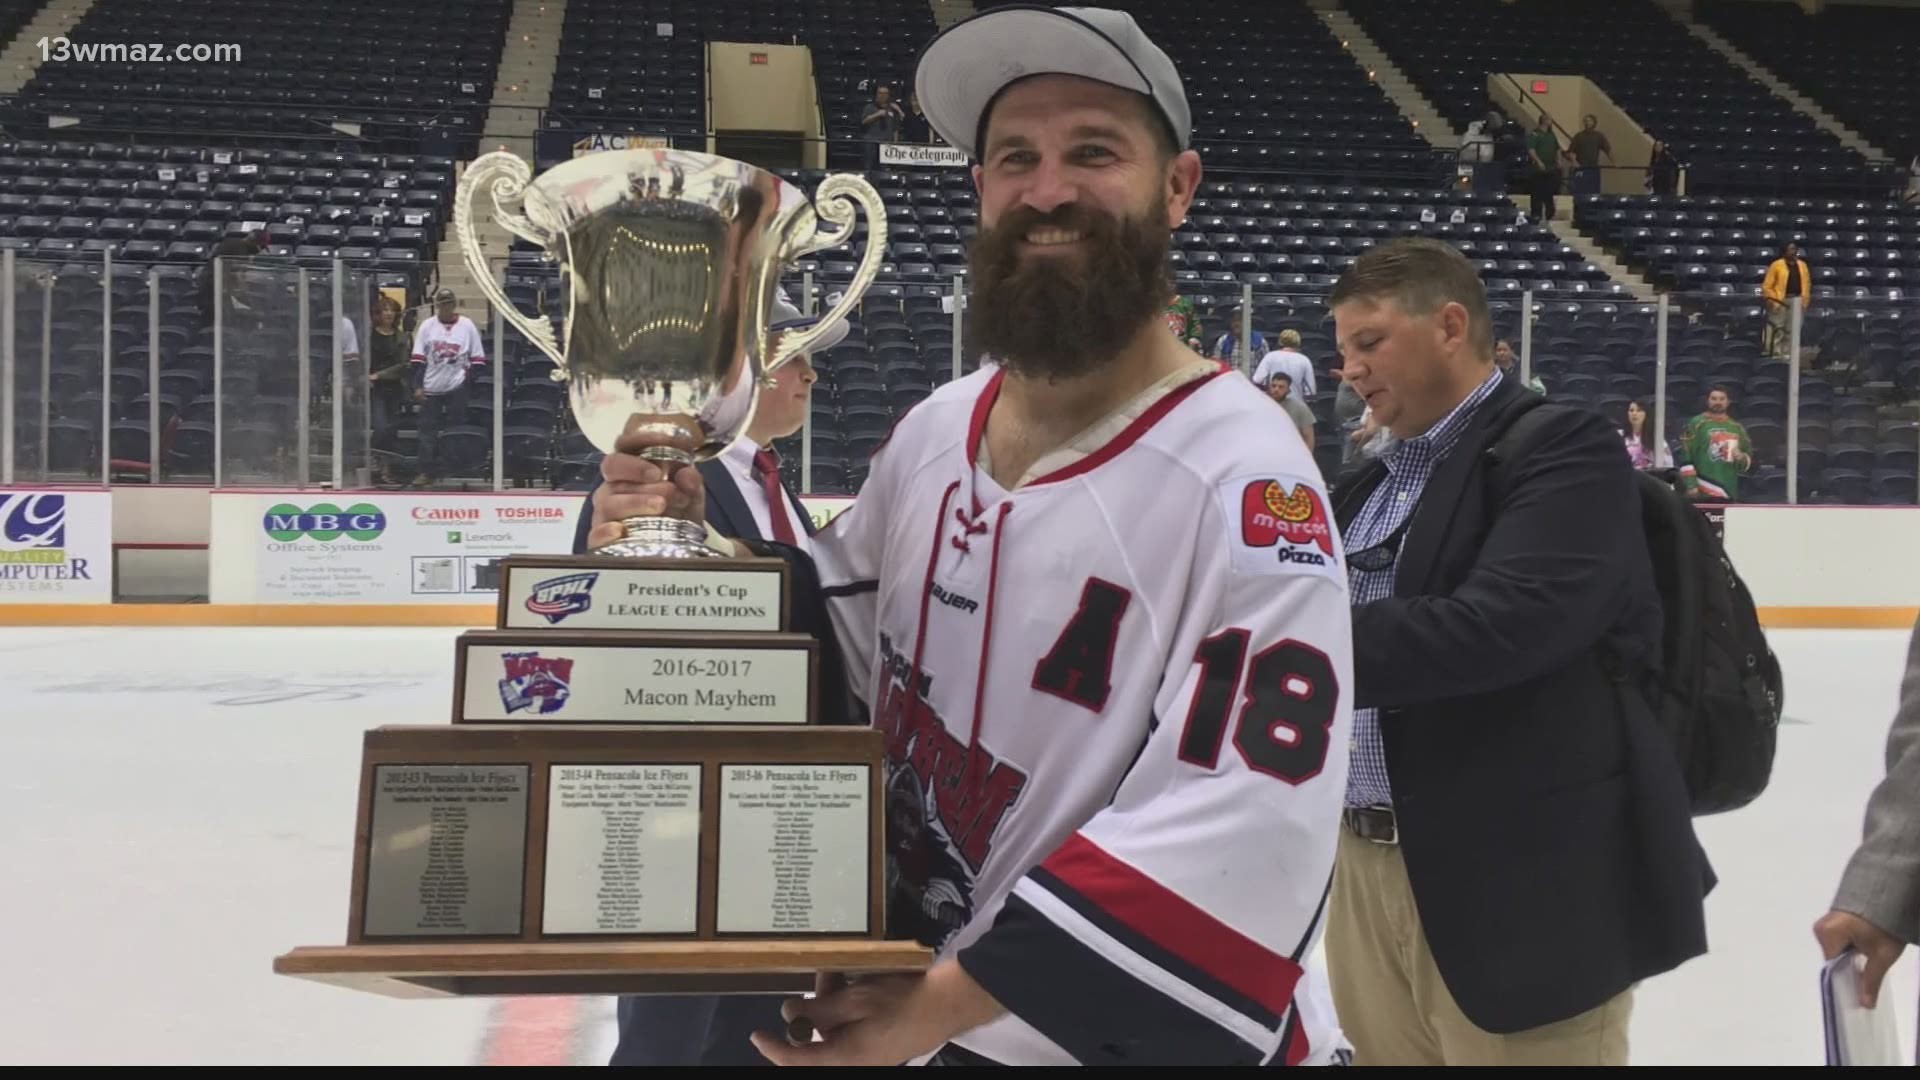 Macon Mayhem won it all a few years back, and now they are a couple of wins away from doing it again.